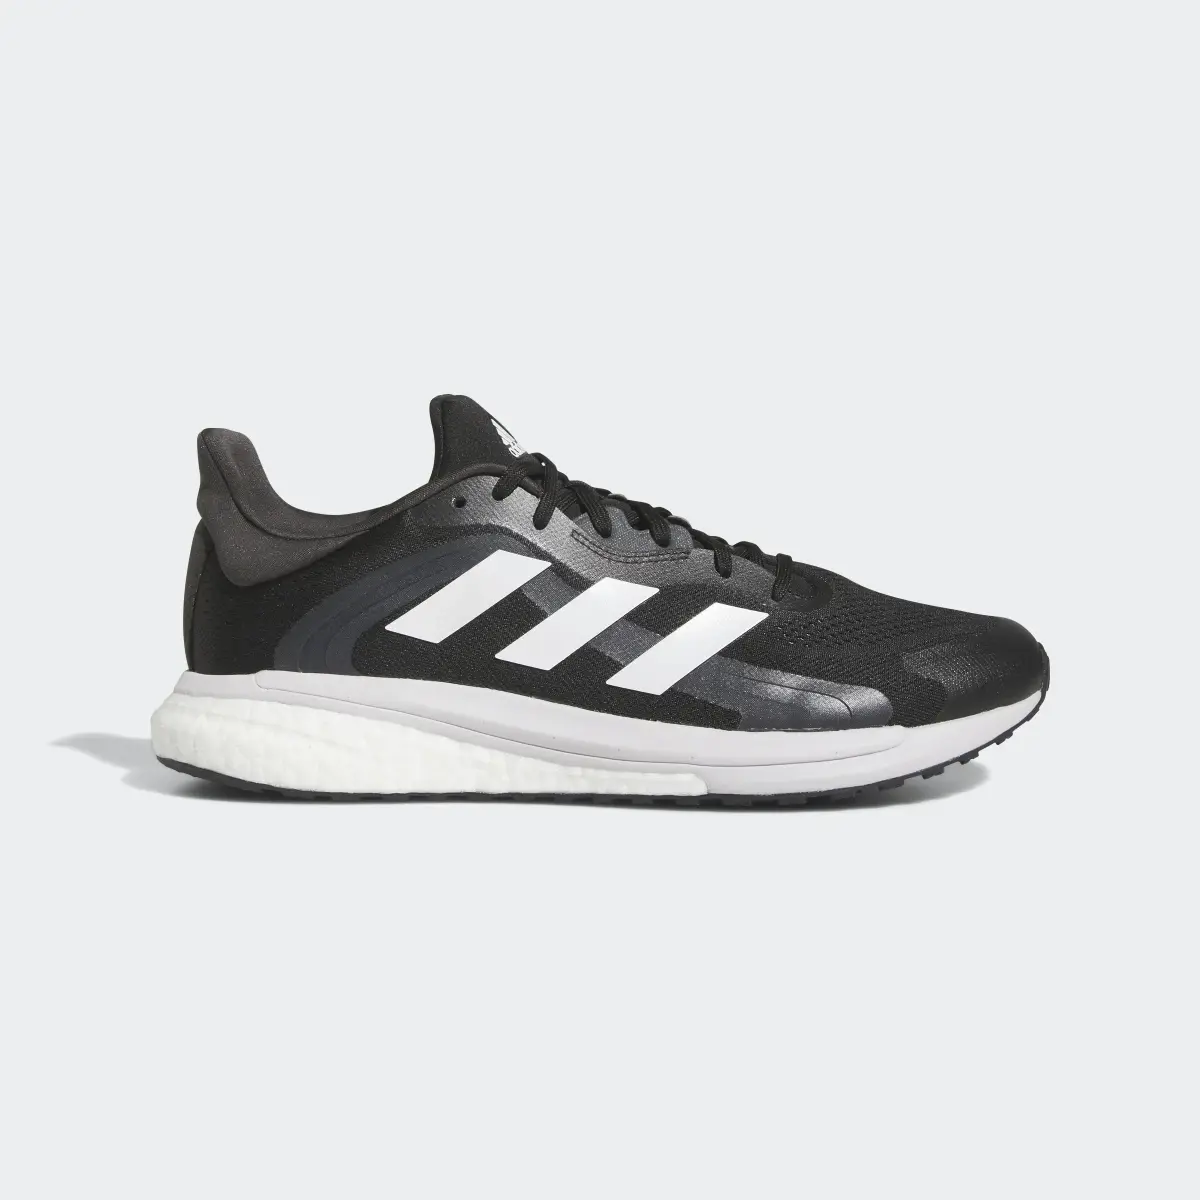 Adidas SolarGlide 4 ST Shoes. 2